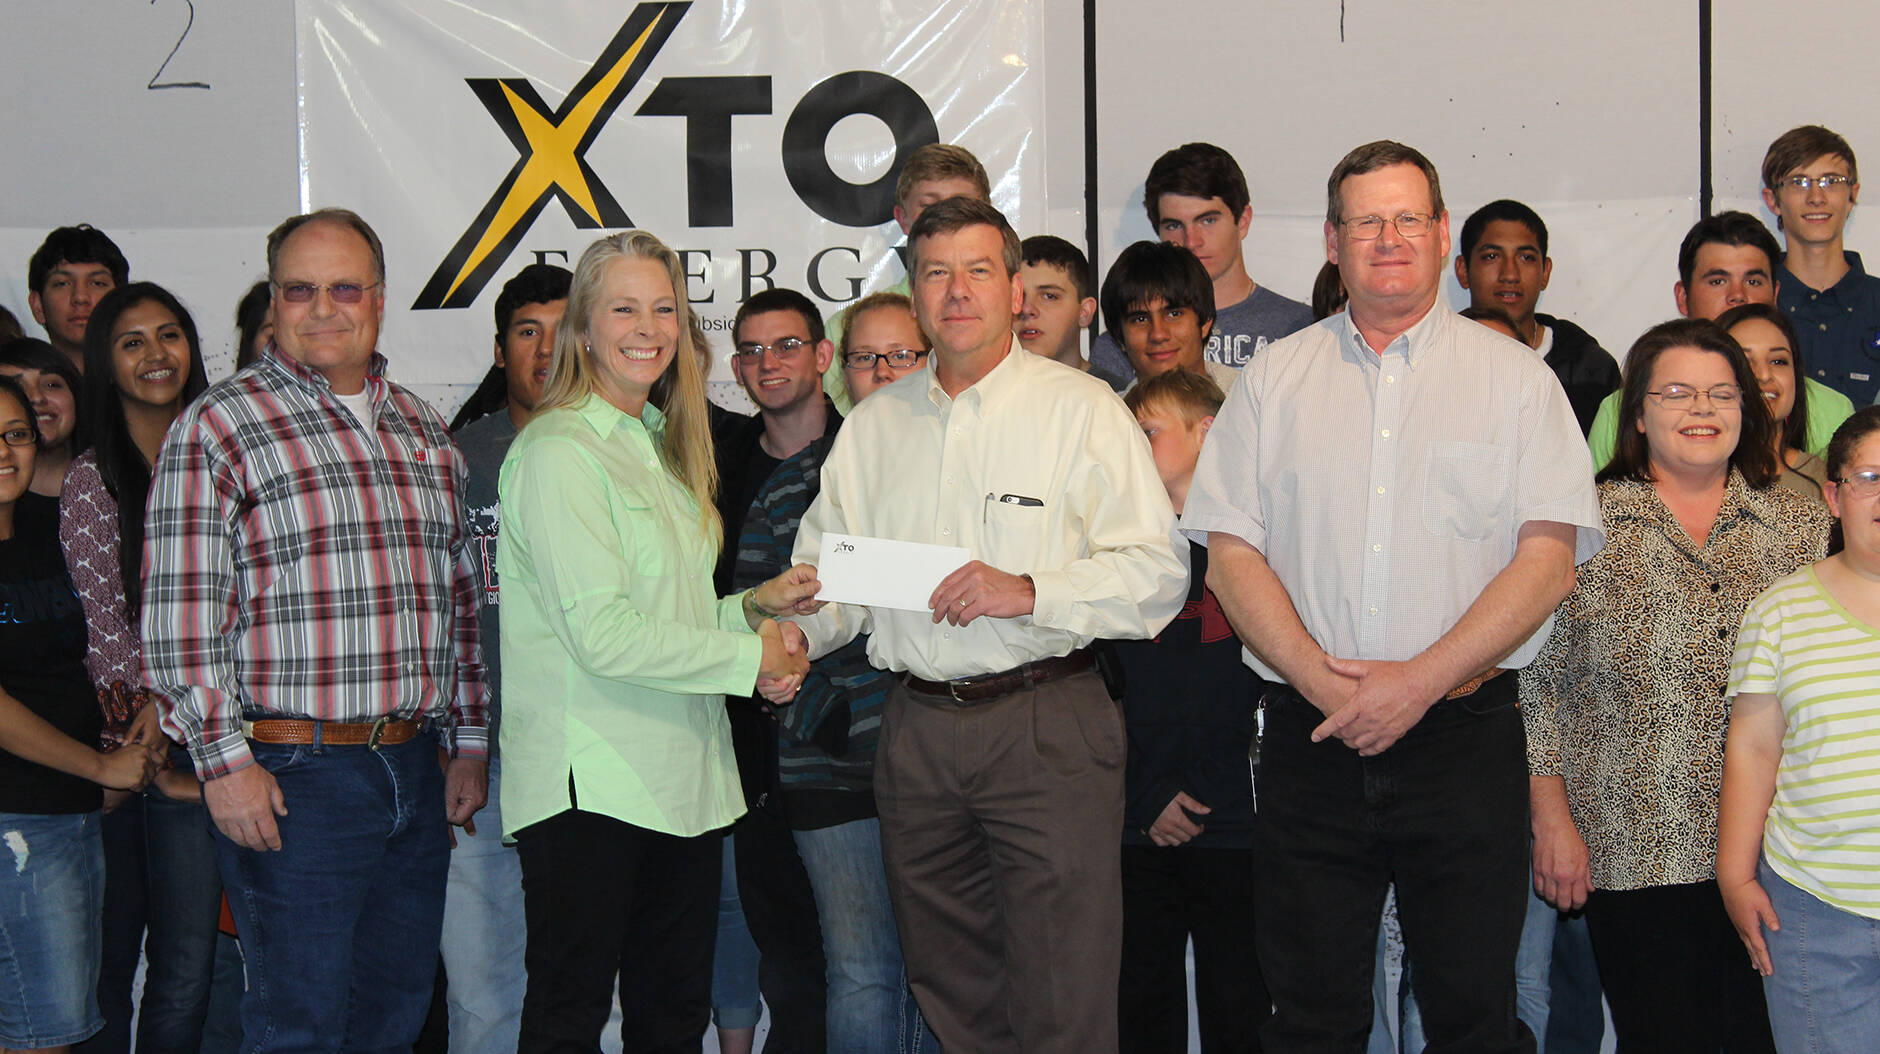 Iraan-Sheffield ISD Ag Barn nears completion thanks to $40,000 donation from XTO Energy